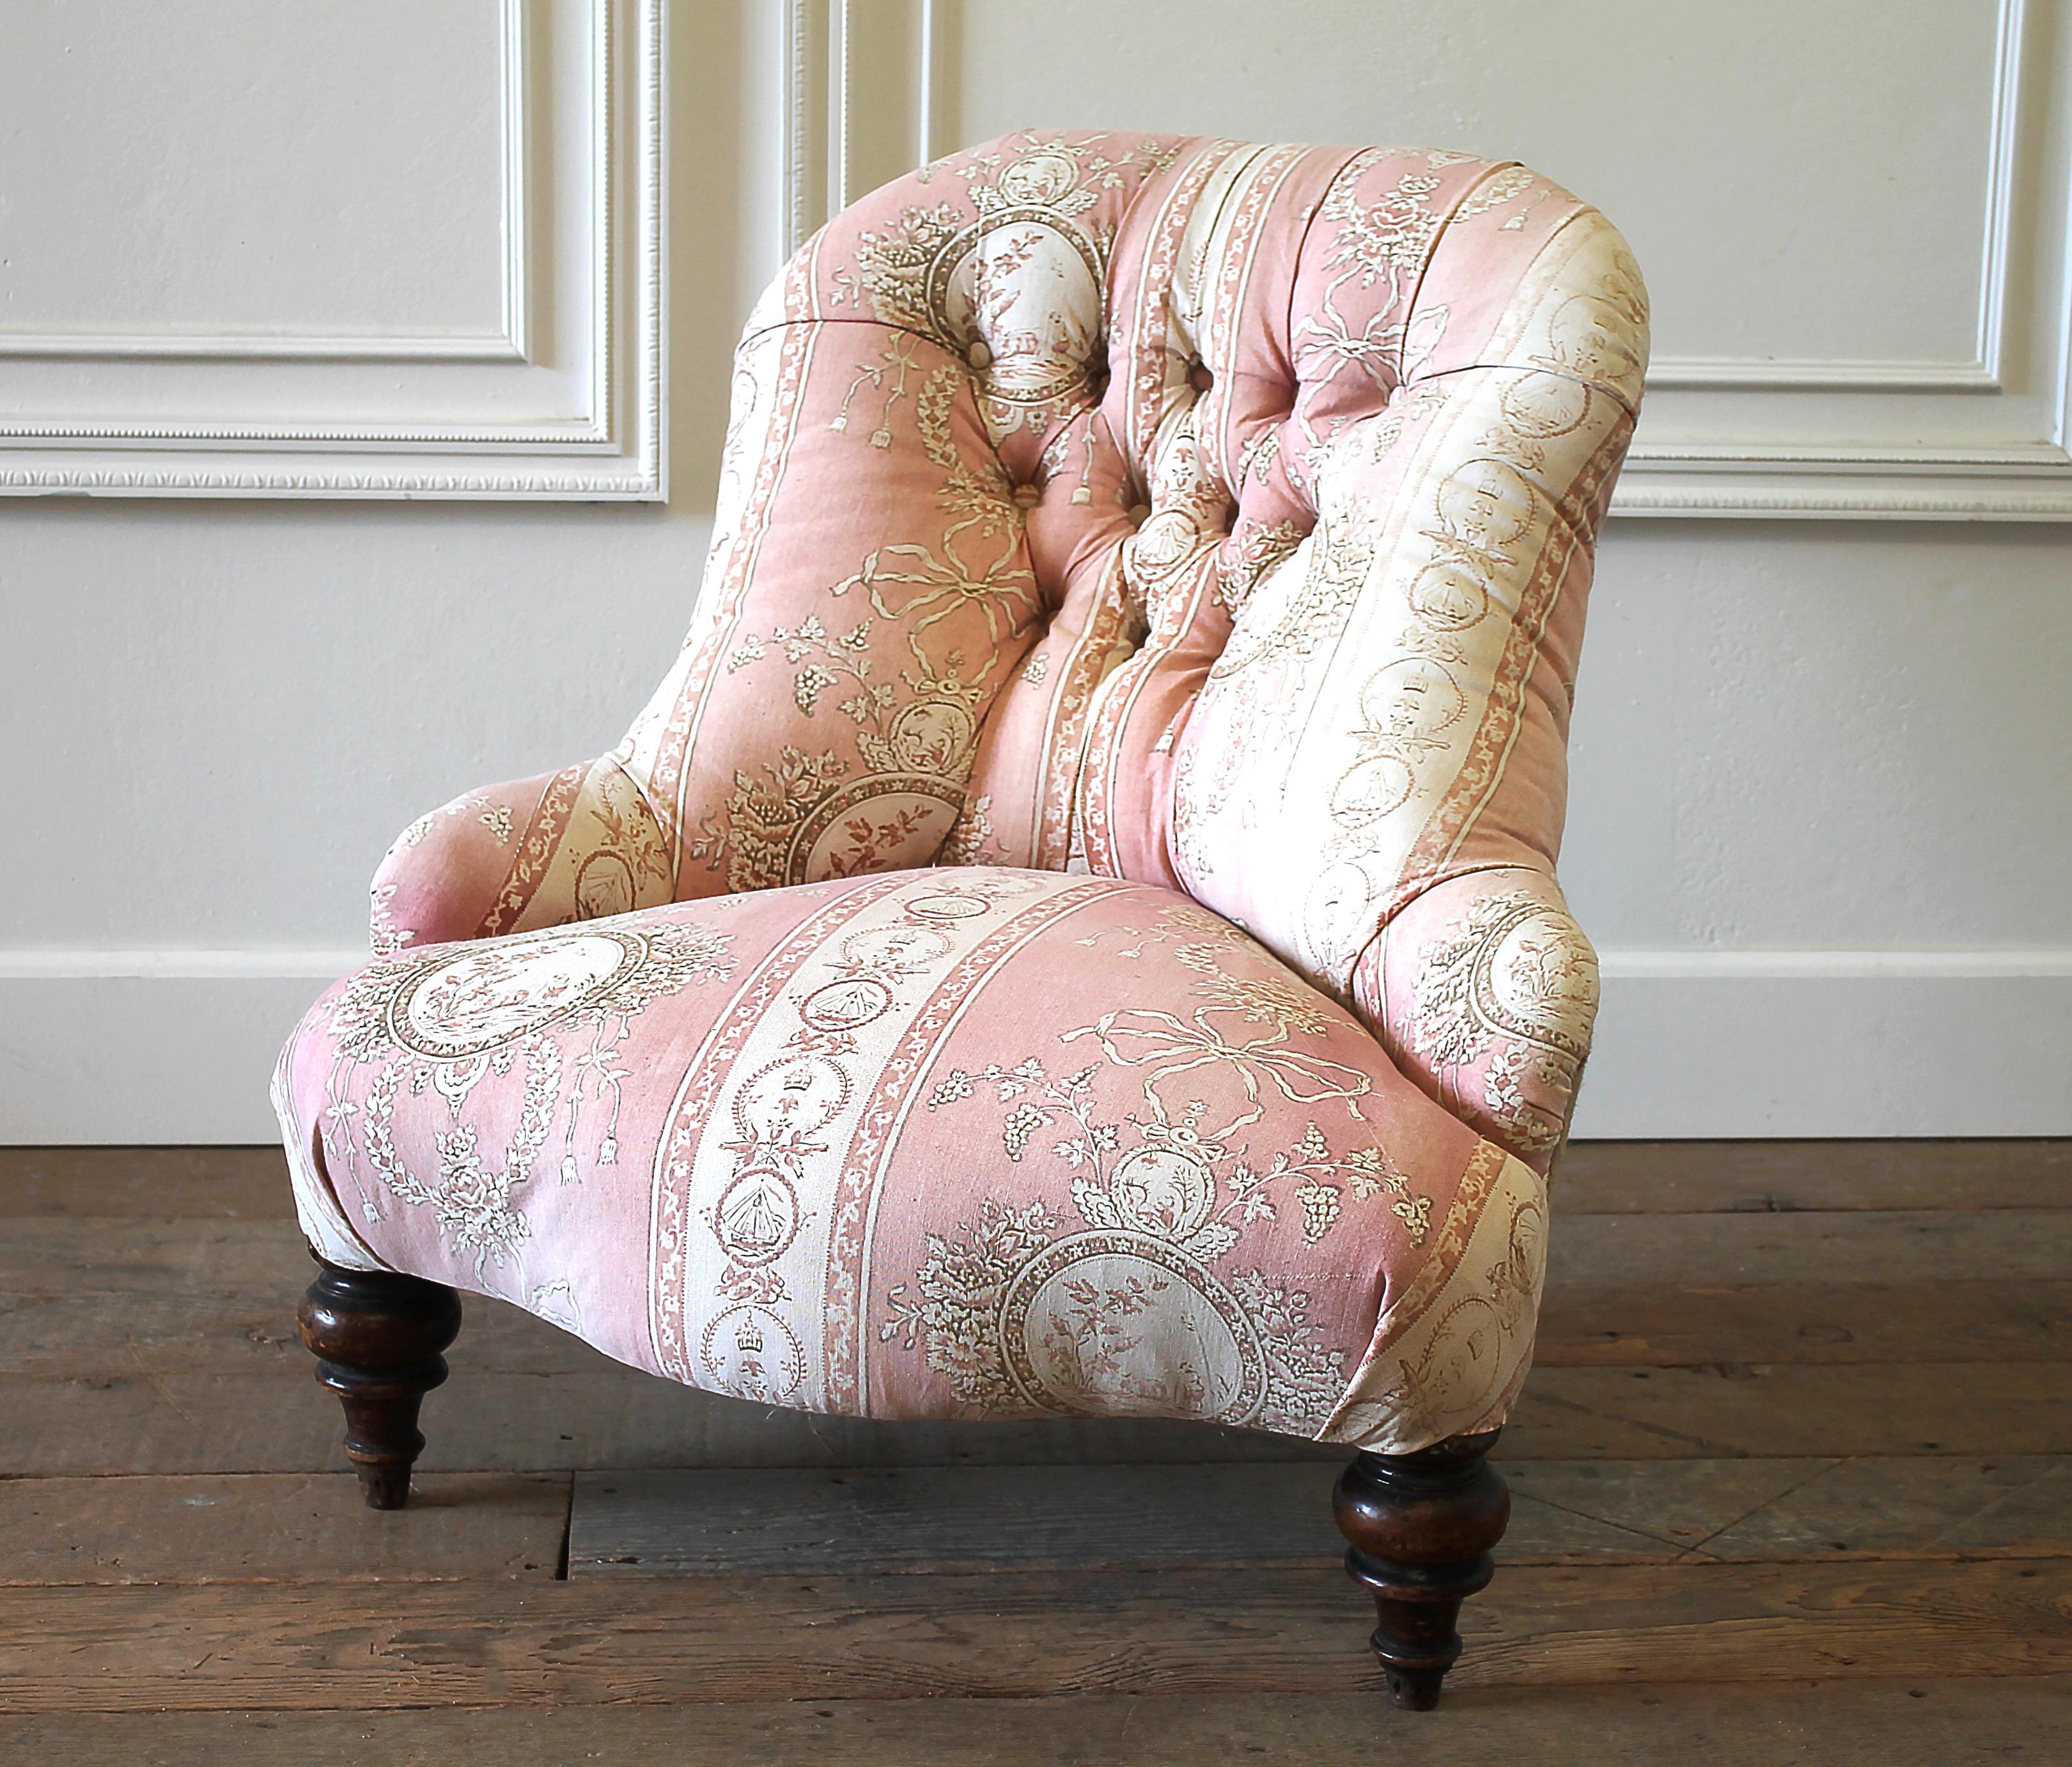 Antique petite Napoleon button tufted chair for child or pet
This adorable chair is perfect for a child, or pet bed. Upholstered in light pink toile, with burlap back. Back legs have been repaired, and are strong and sturdy.
Measures: 26.5